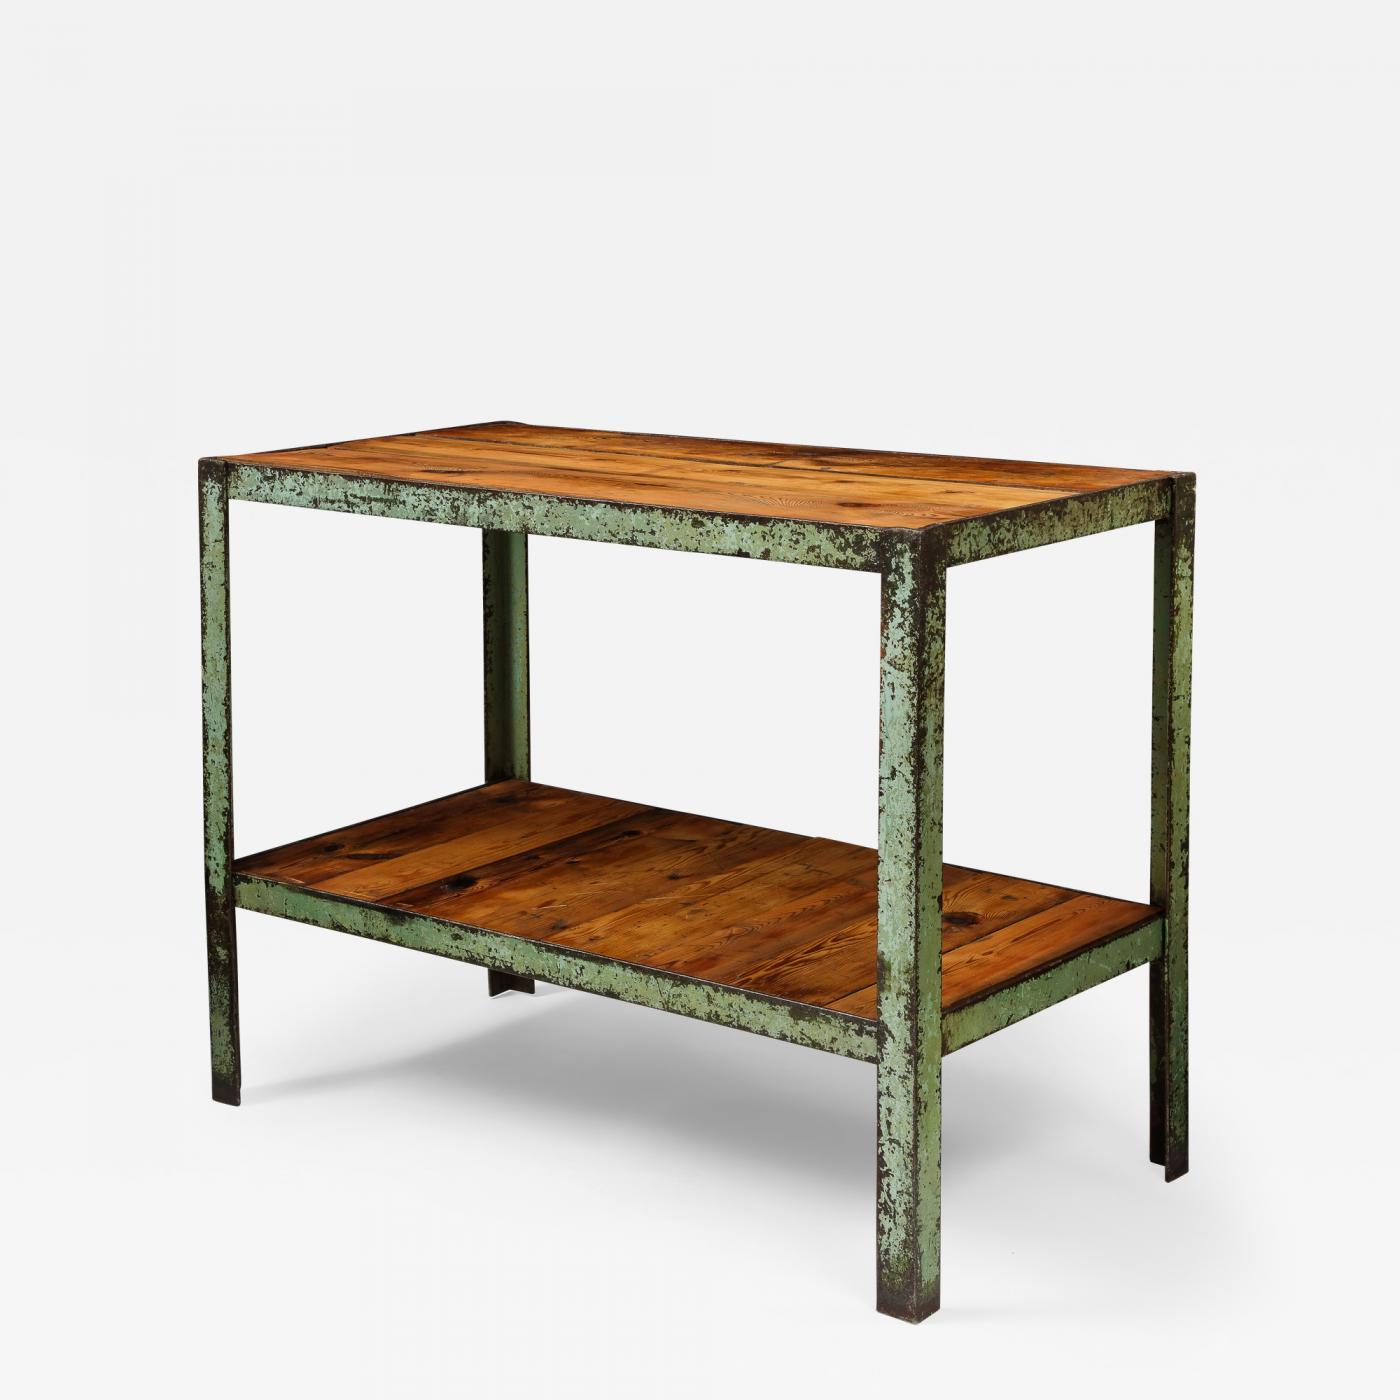 Modern Industrial Side Table/Console with Shelf in Patinated Metal and European Pine